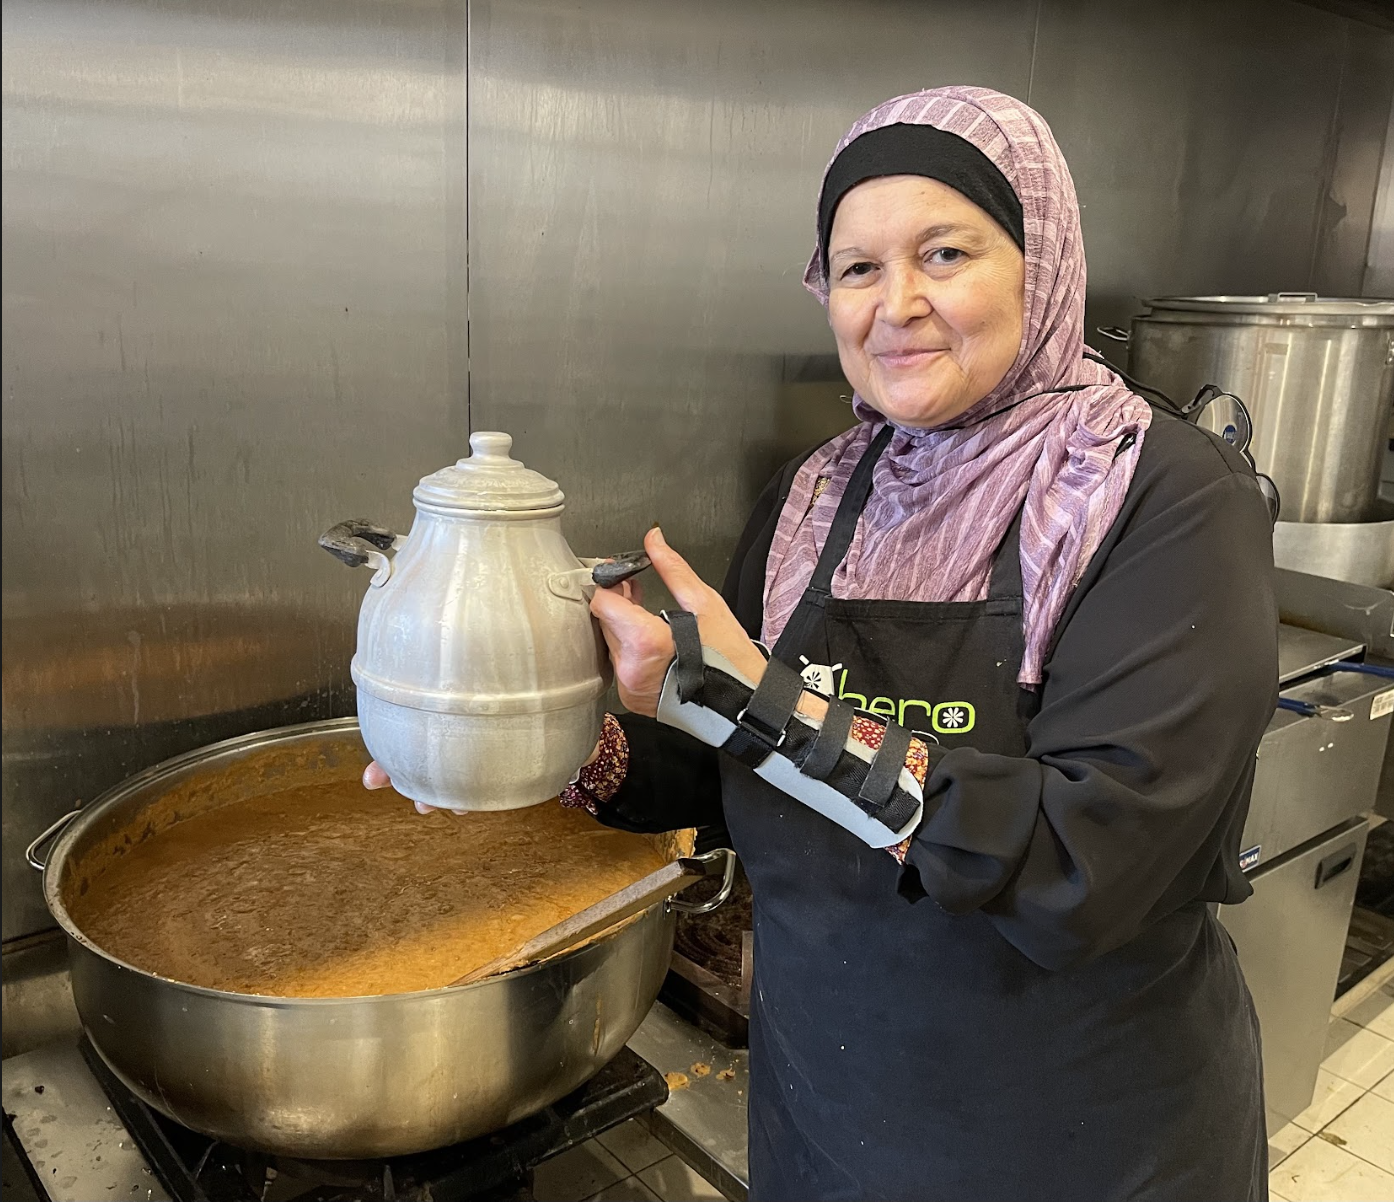 Recipes for Ramadan – sharing culture and food